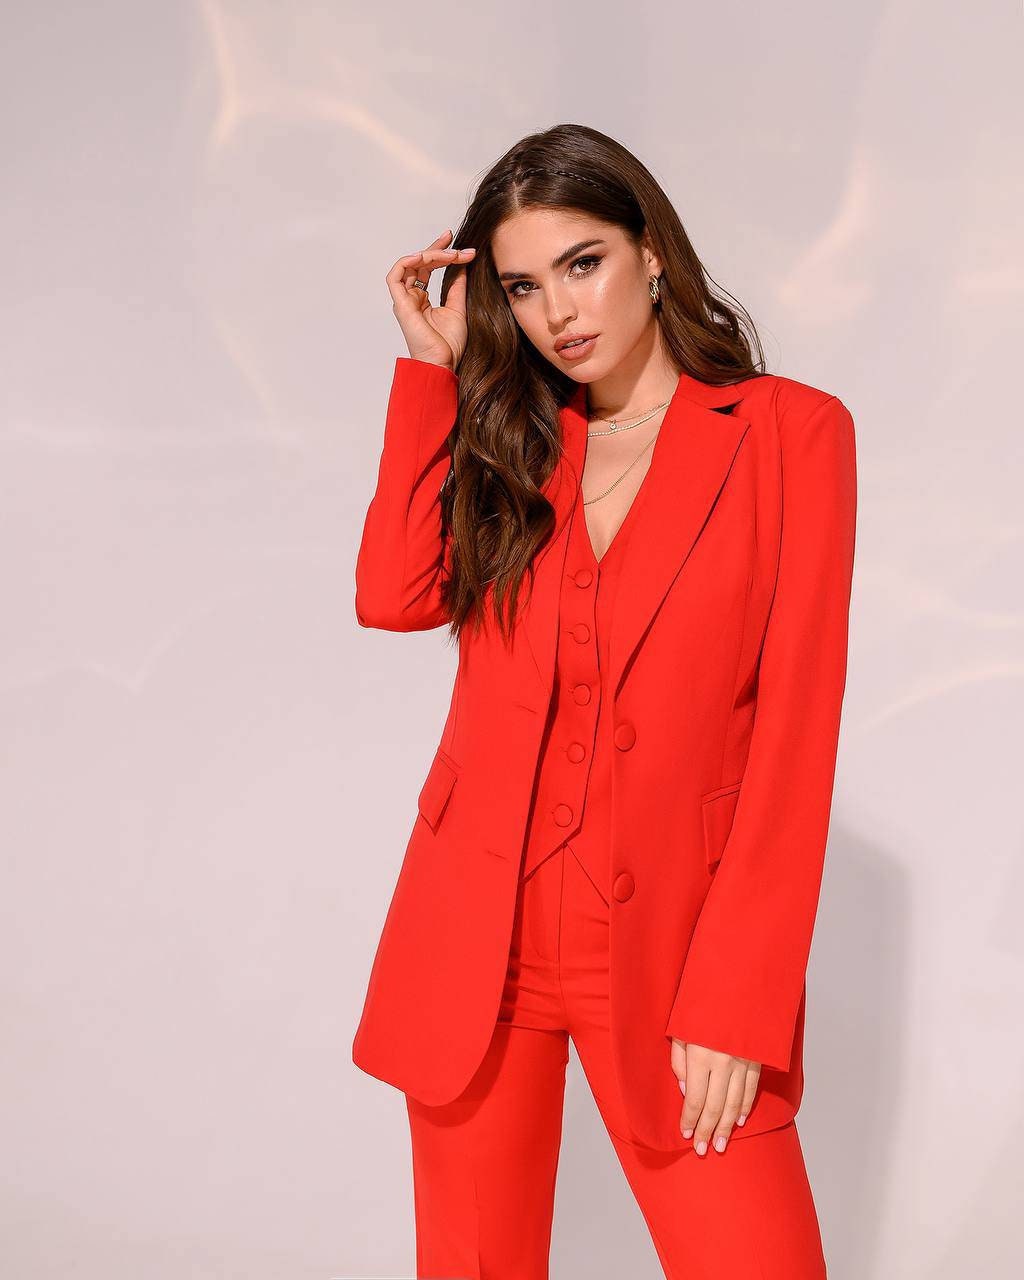 Loose Red Carpet Blazer Suit For Women Perfect For Club Parties, Weddings,  And Leisure Events Dress Jackets For Women And Pants Included From  Foreverbridal, $74.66 | DHgate.Com